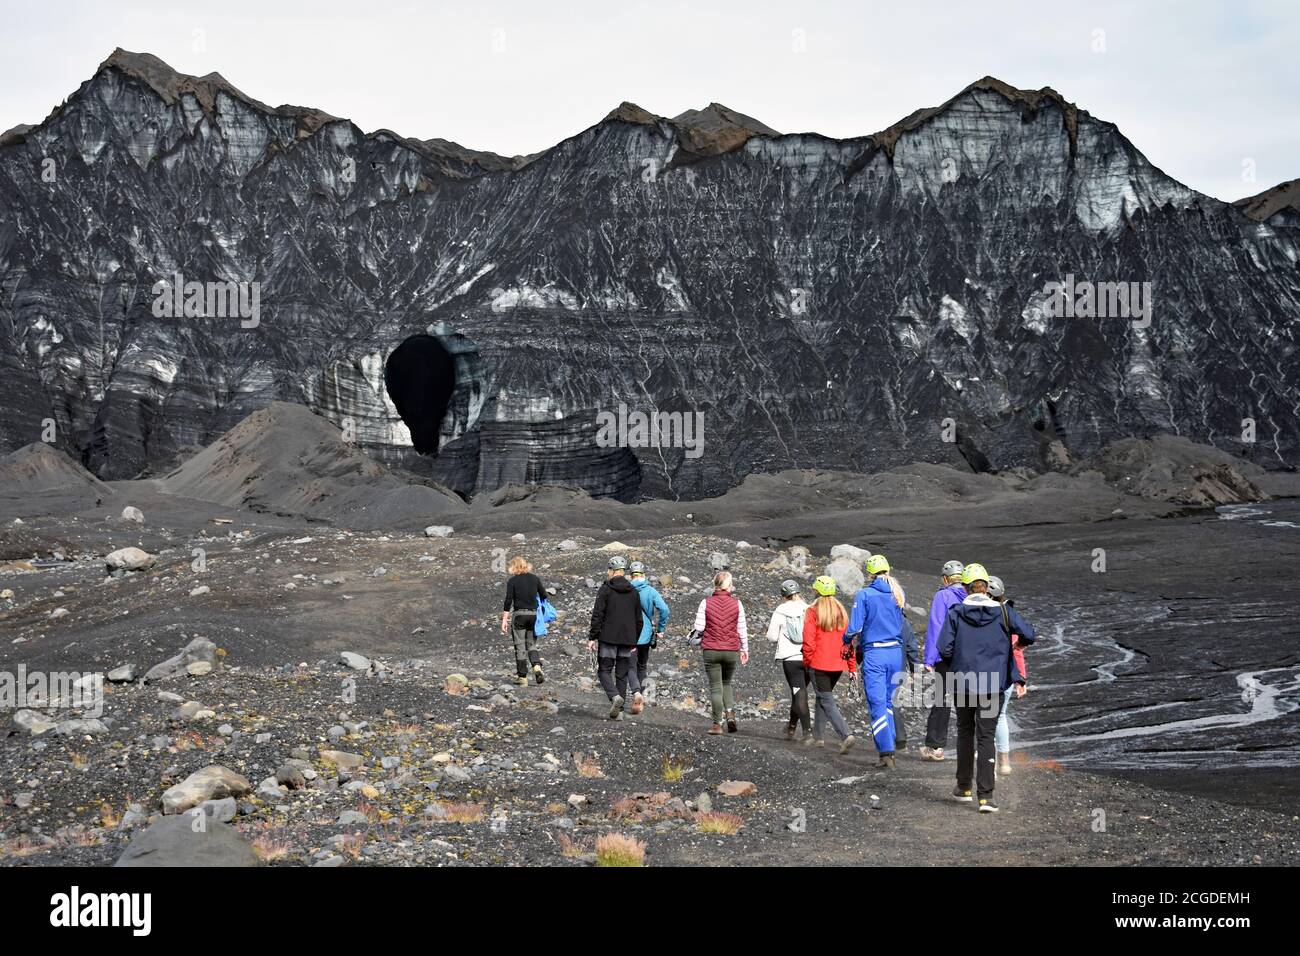 A group tour in brightly coloured clothing walk up to the black volcanic sand covered Kotlujokull Glacier, an outlet glacier of Myrdalsjokull. Iceland Stock Photo